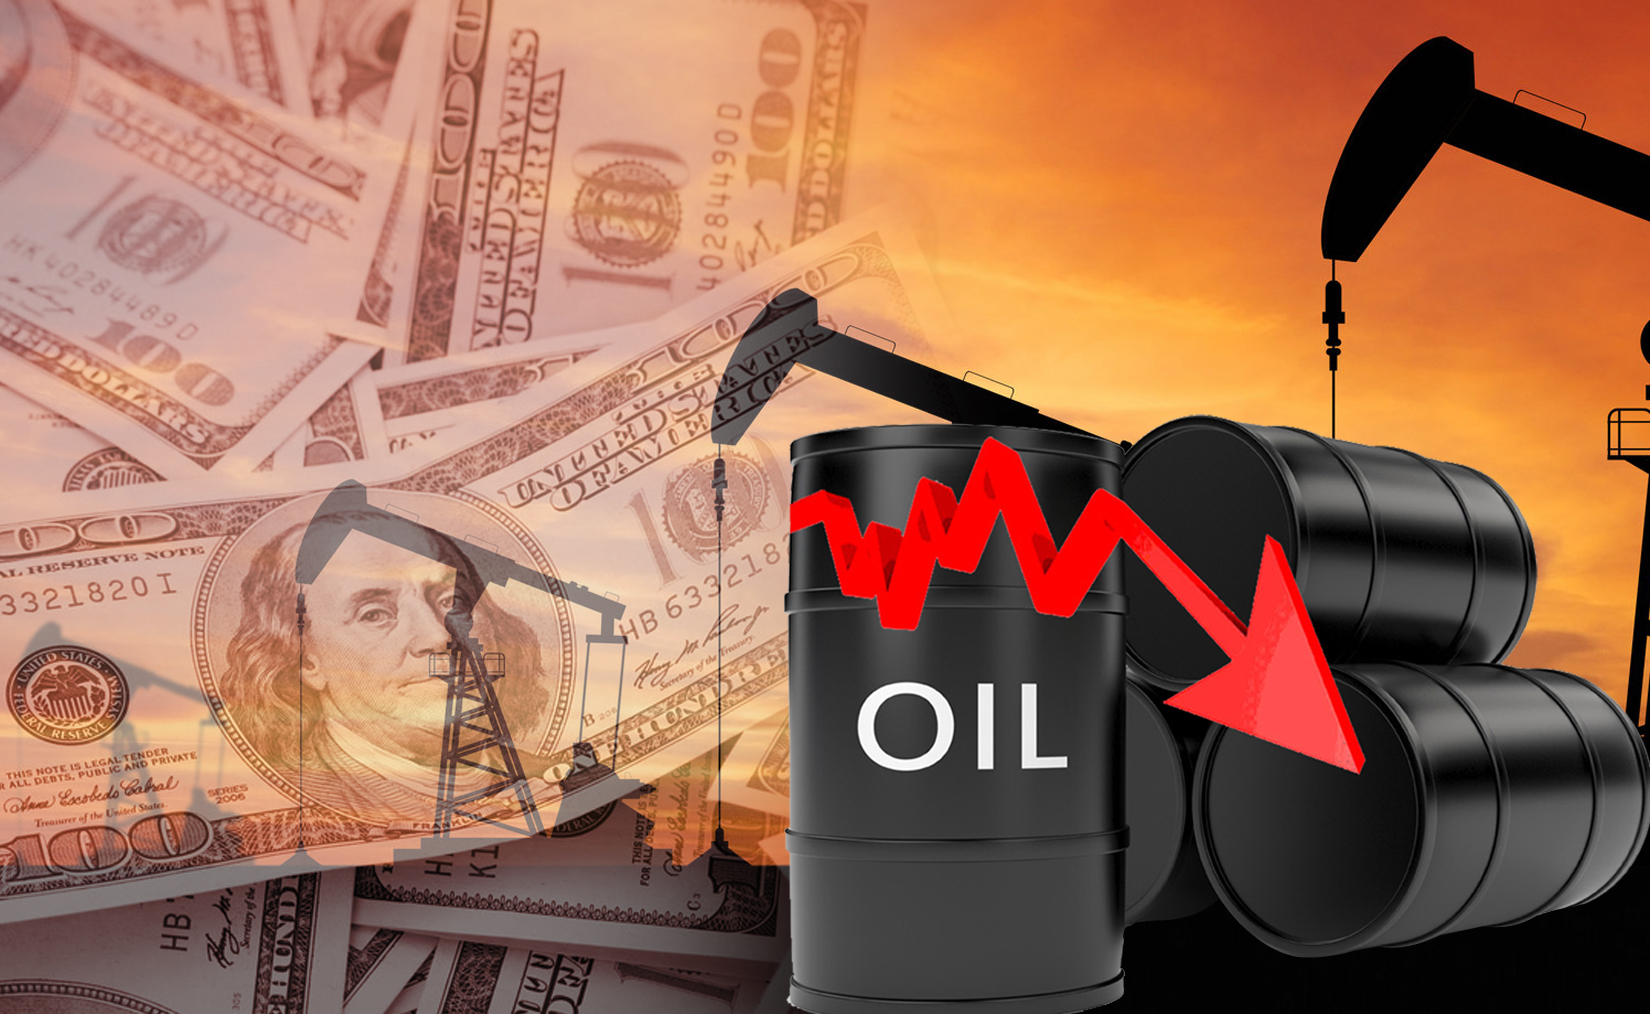 OPEC price stands at USD 69.77 pb